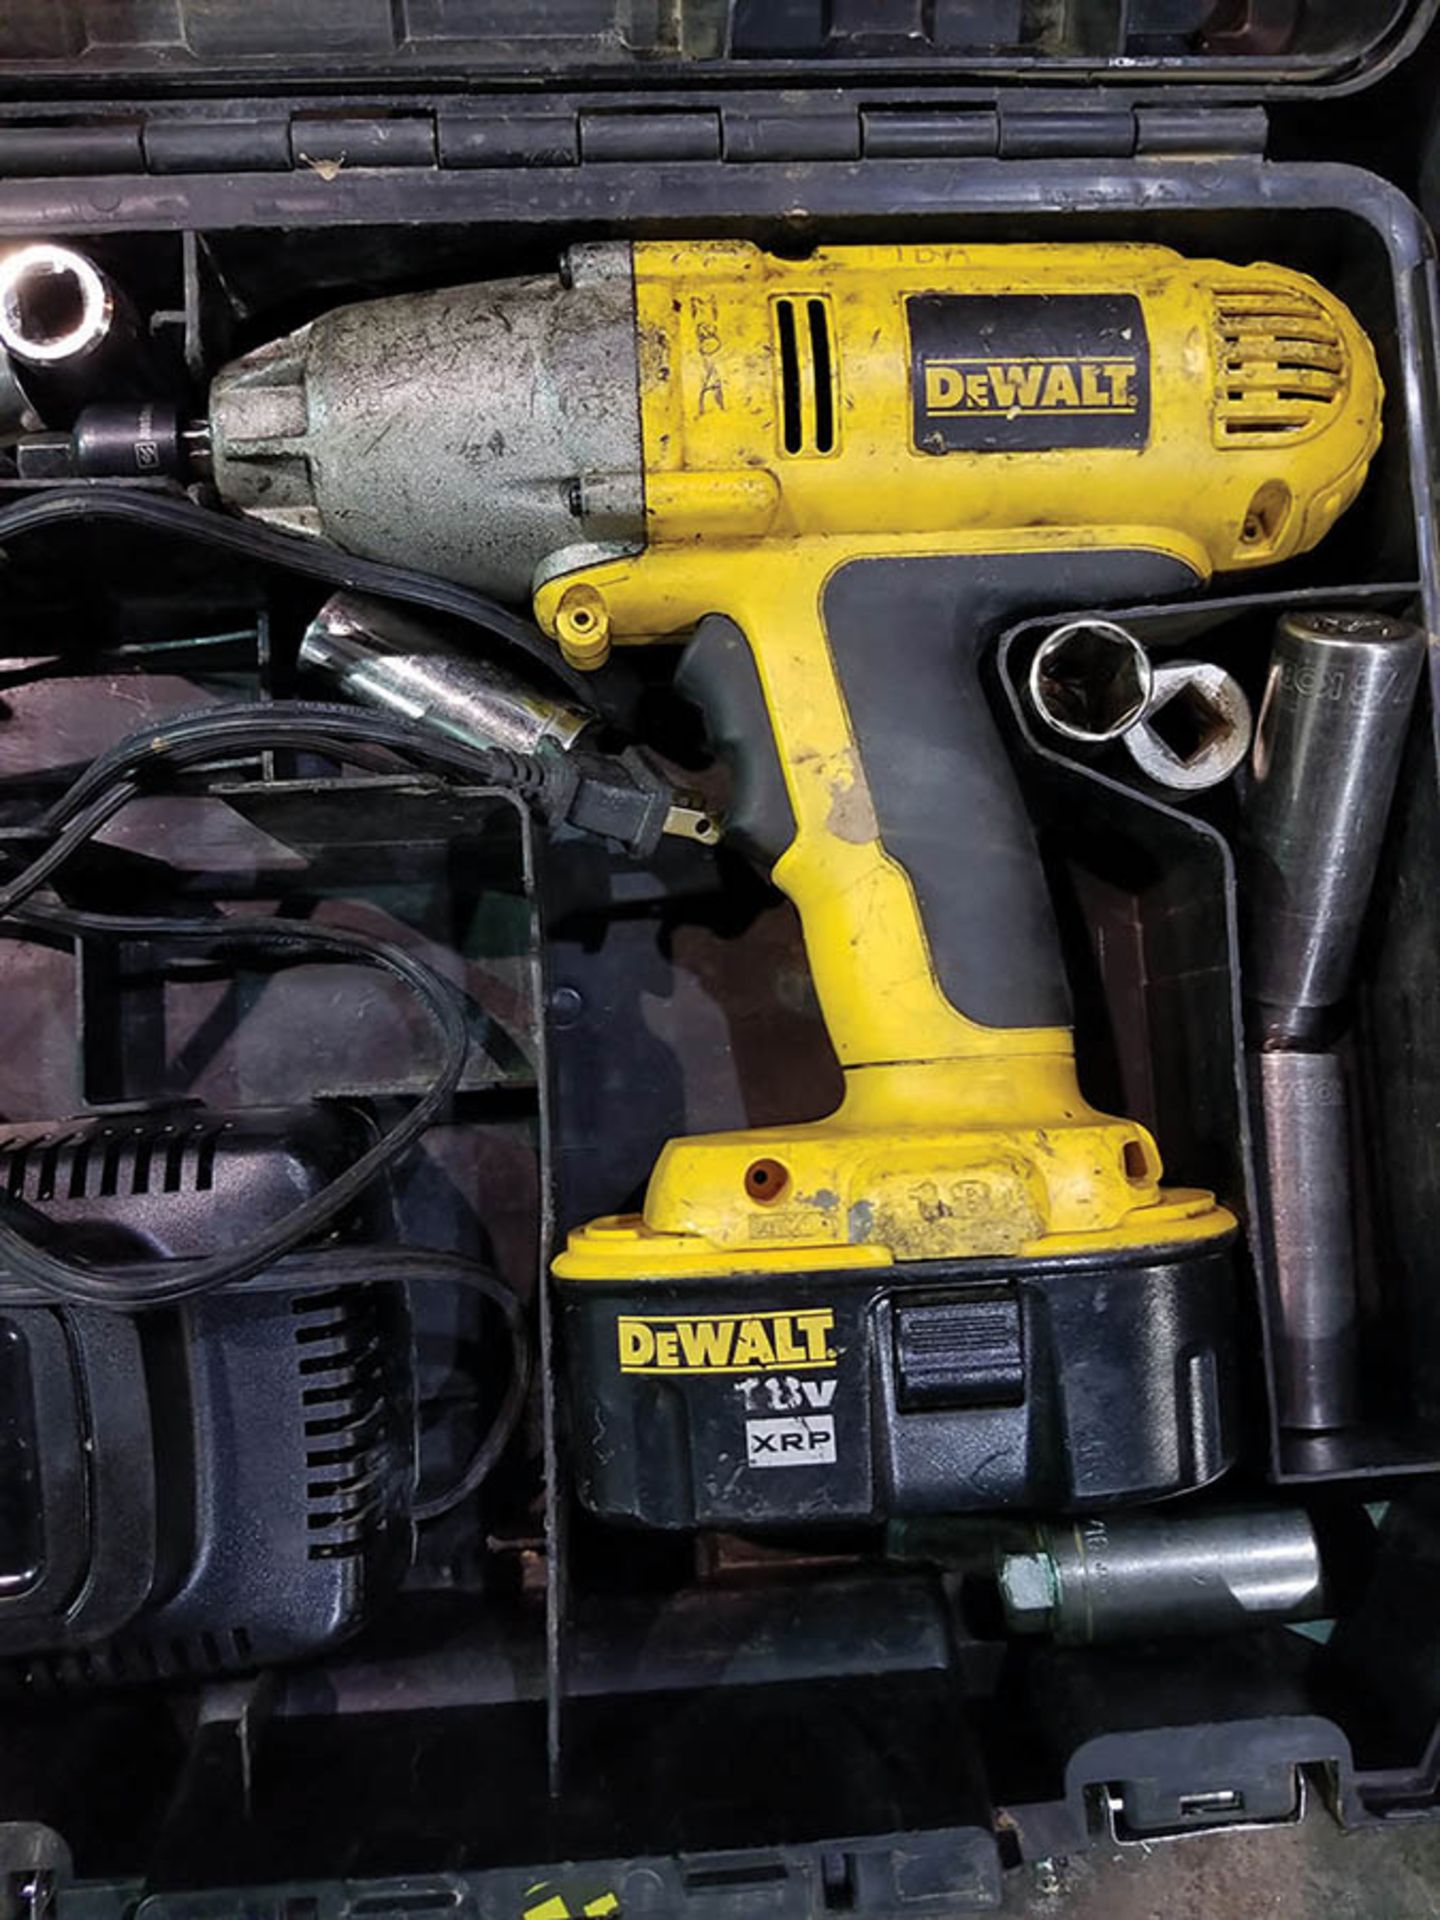 DEWALT HD 18V CORDLESS IMPACT WRENCH, MODEL DW059, 1/2" DRIVE, WITH CASE, CHARGER, AND ASSORTED - Image 2 of 2